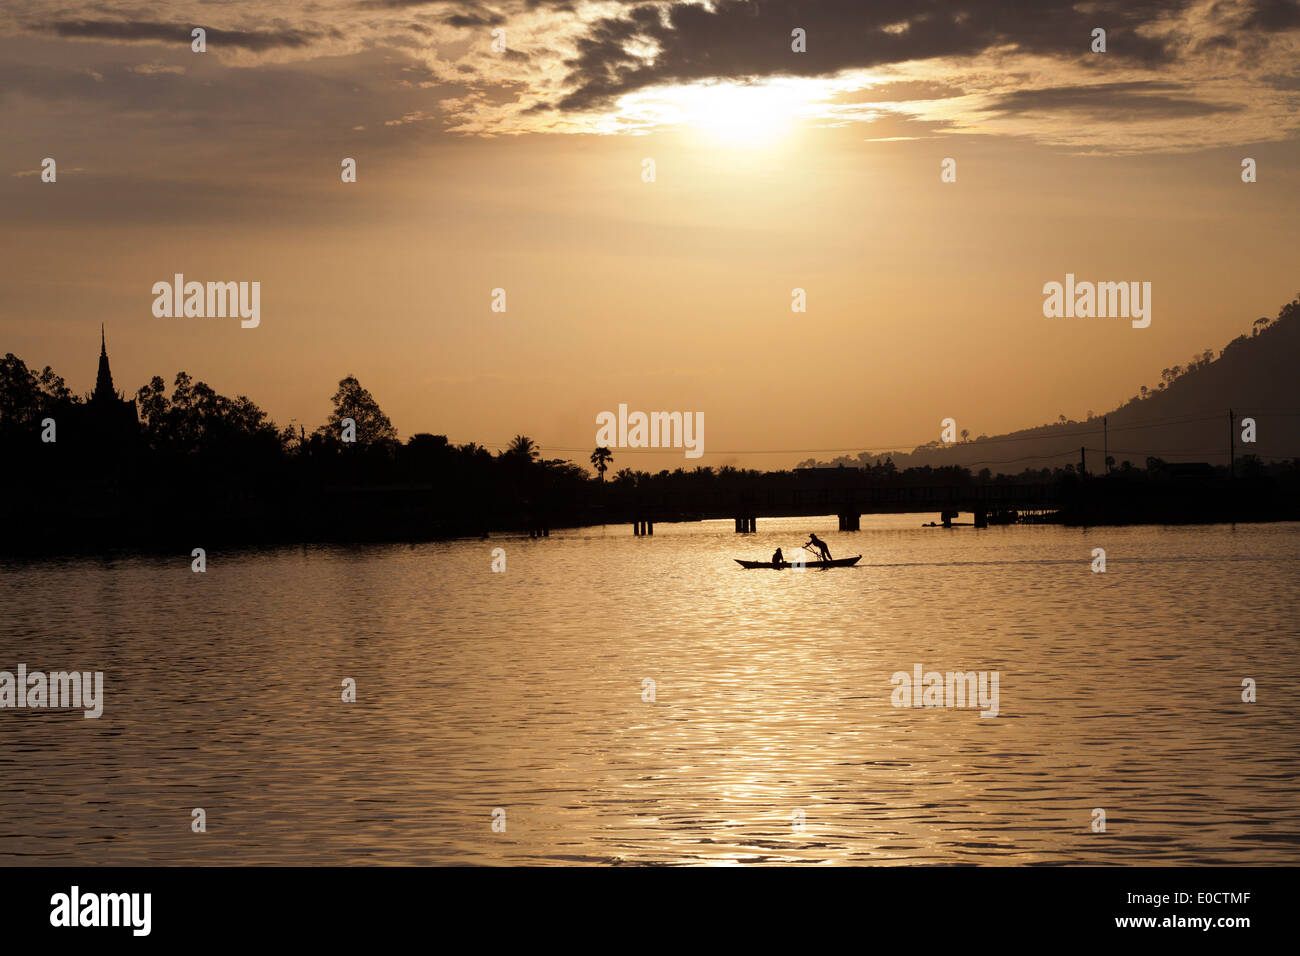 Boat at sunset in Kampot at the Prek Thom River, Kampot province, Cambodia, Asia Stock Photo